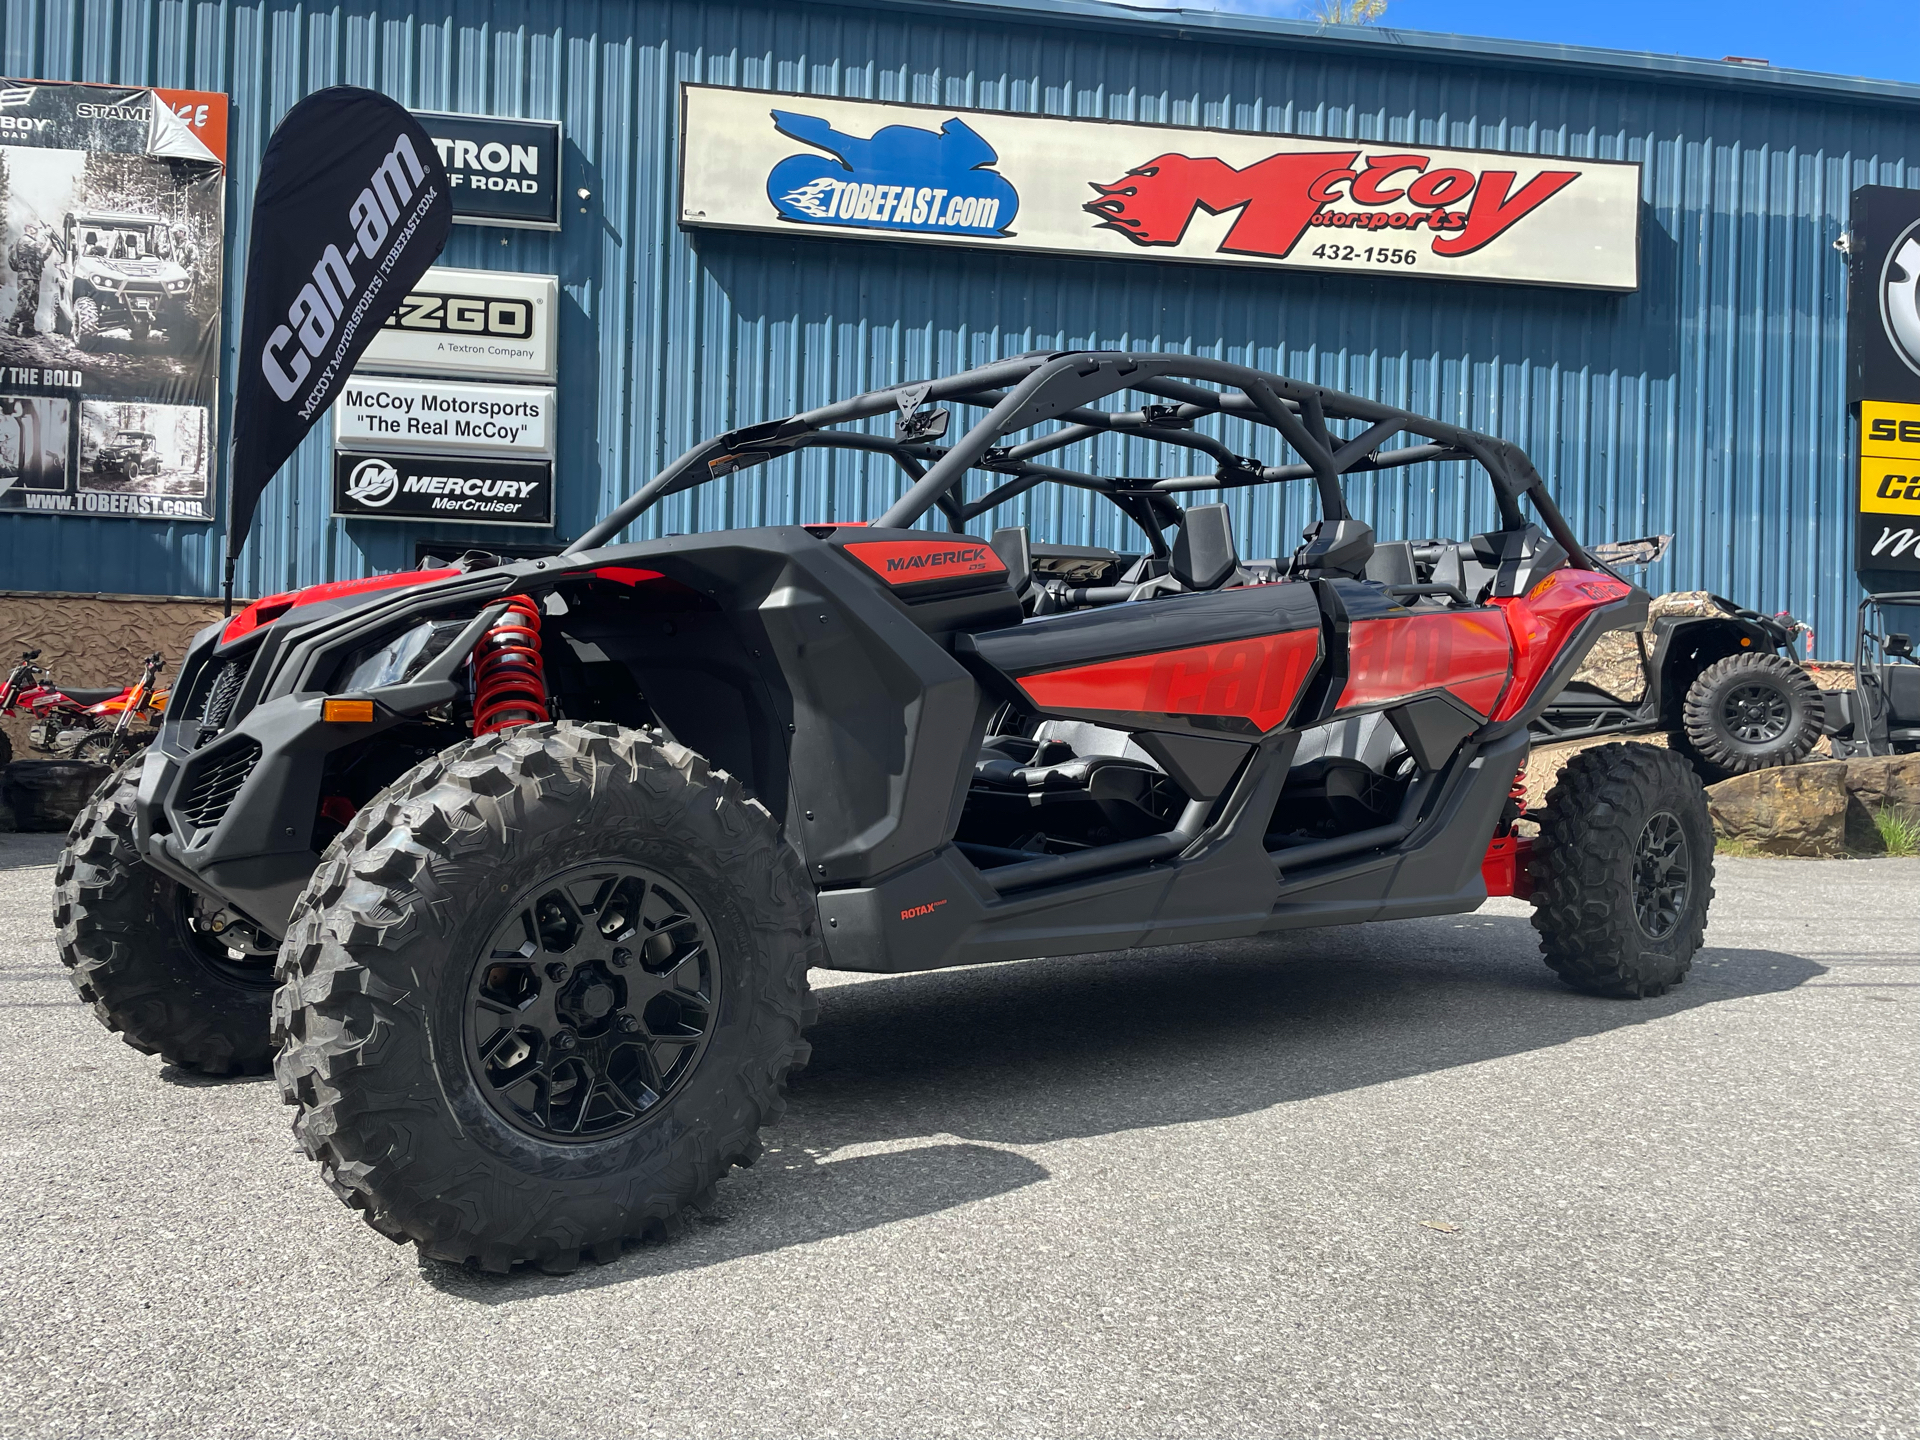 2022 Can-Am Maverick X3 Max DS Turbo in Pikeville, Kentucky - Photo 2